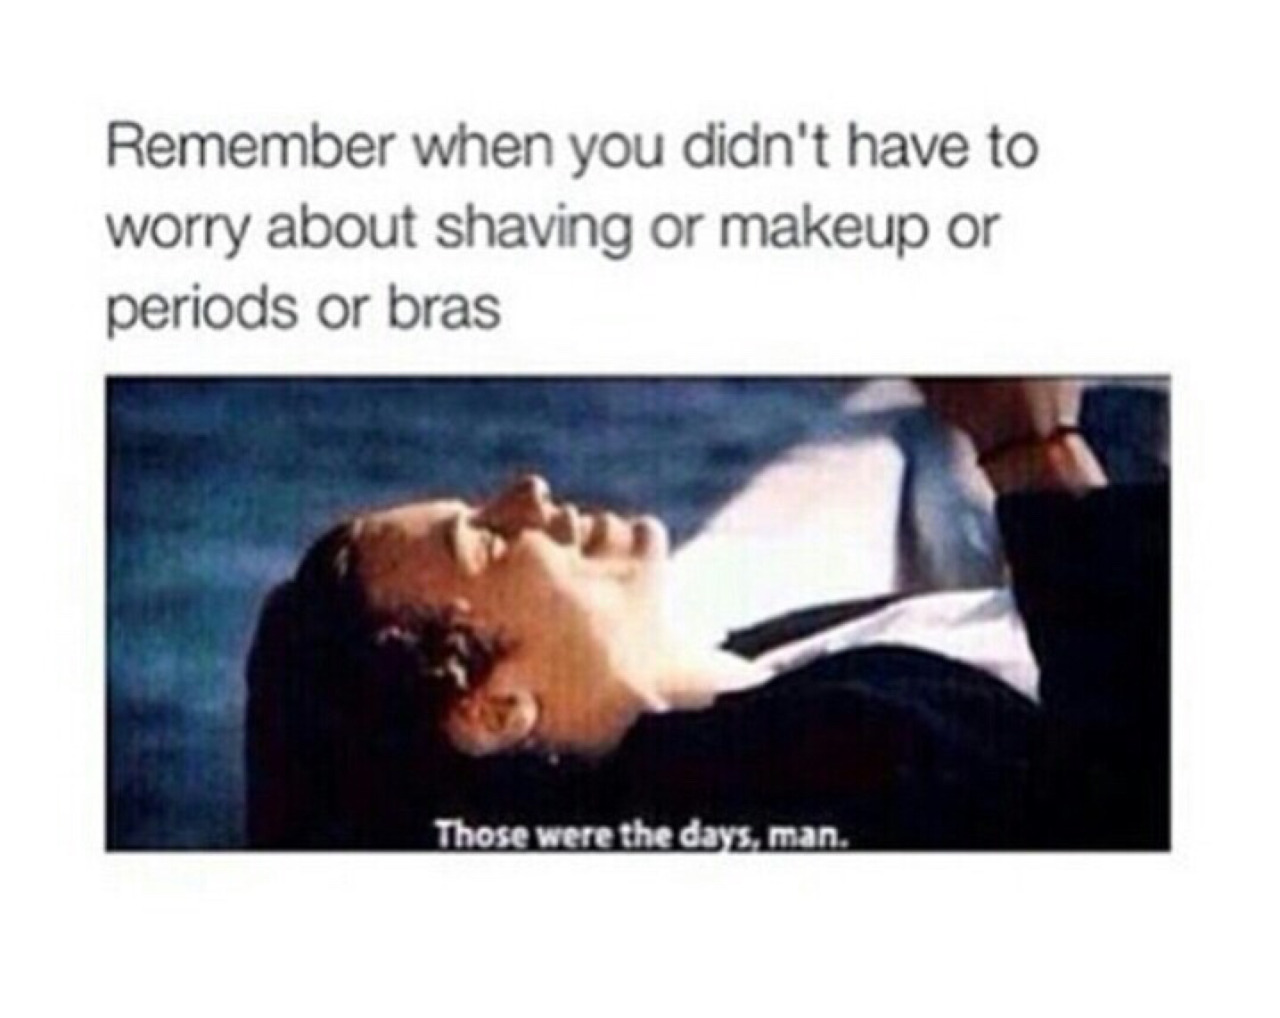 girls can relate